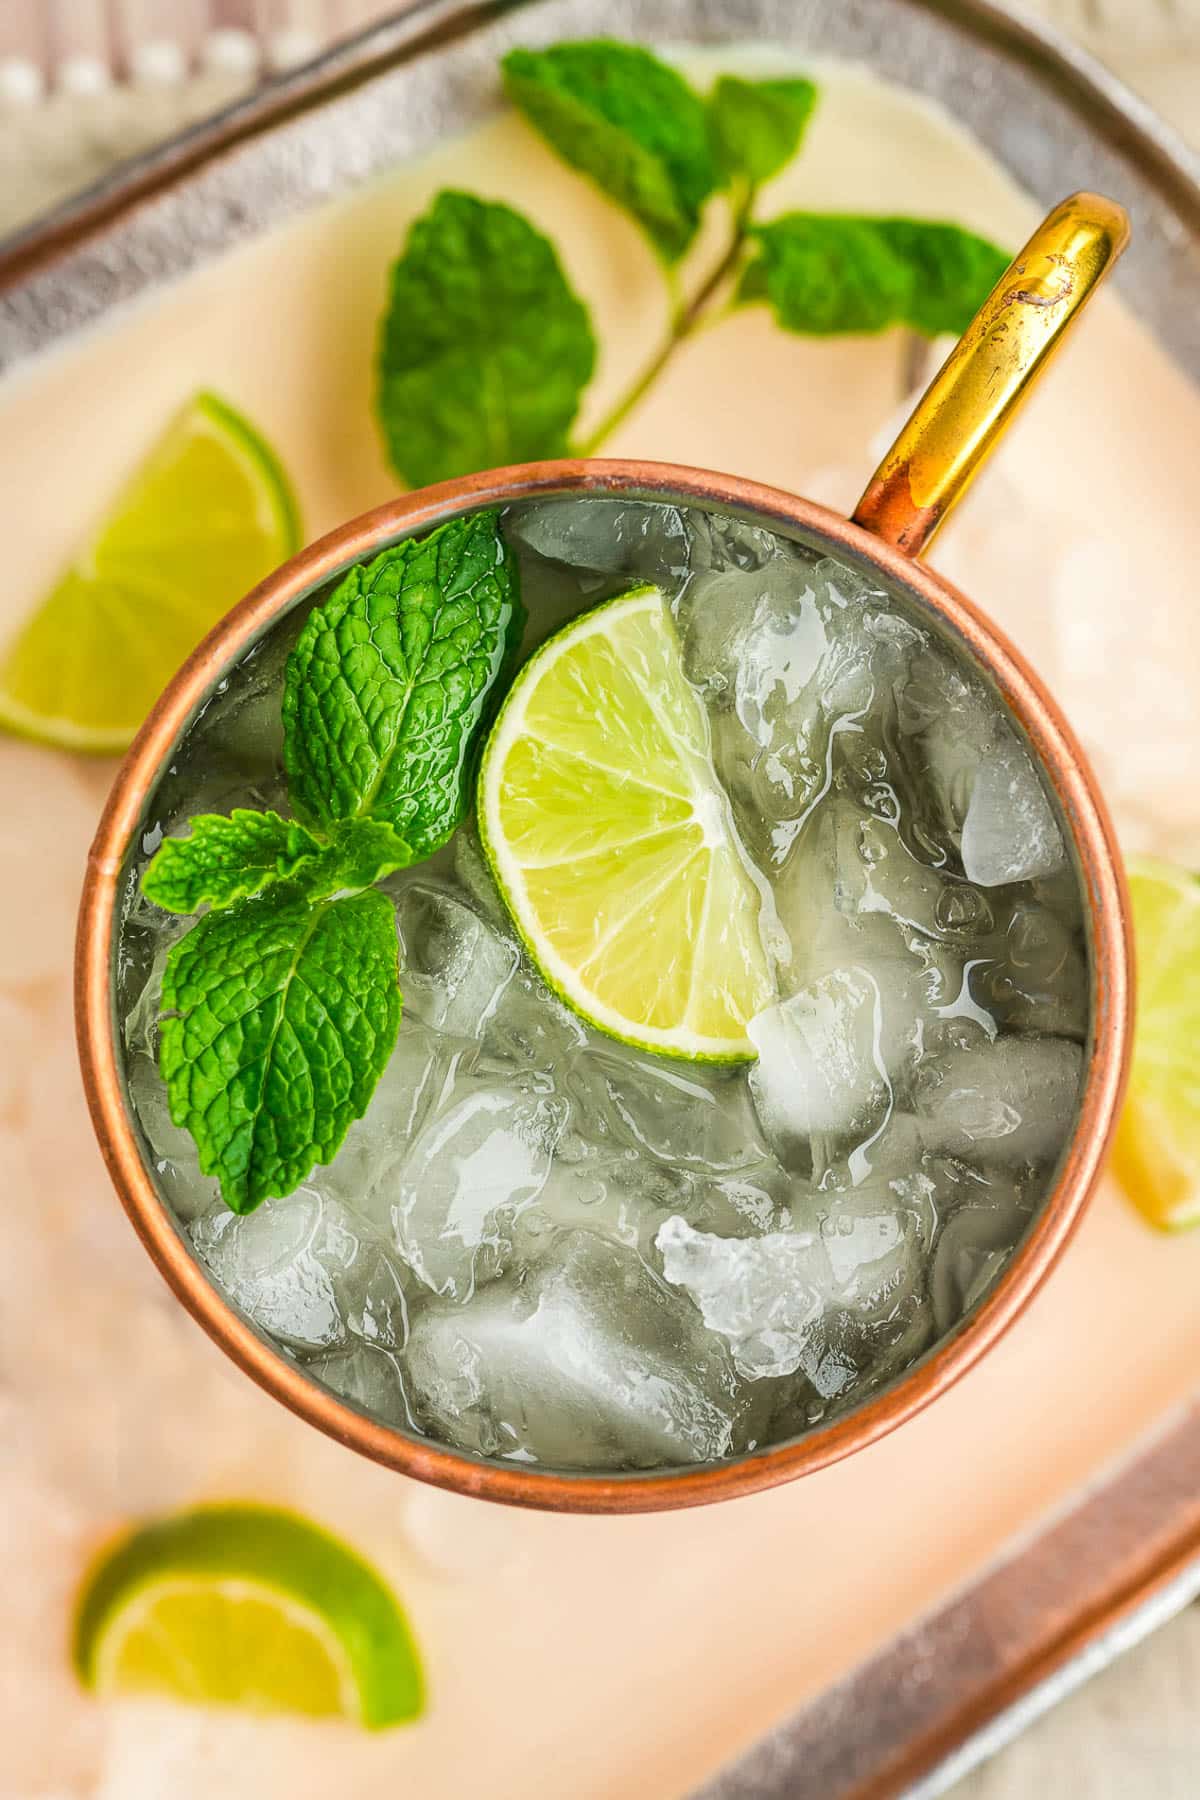 An overhead view of an Irish mule with a copper mug filled with crushed ice and alcohol.